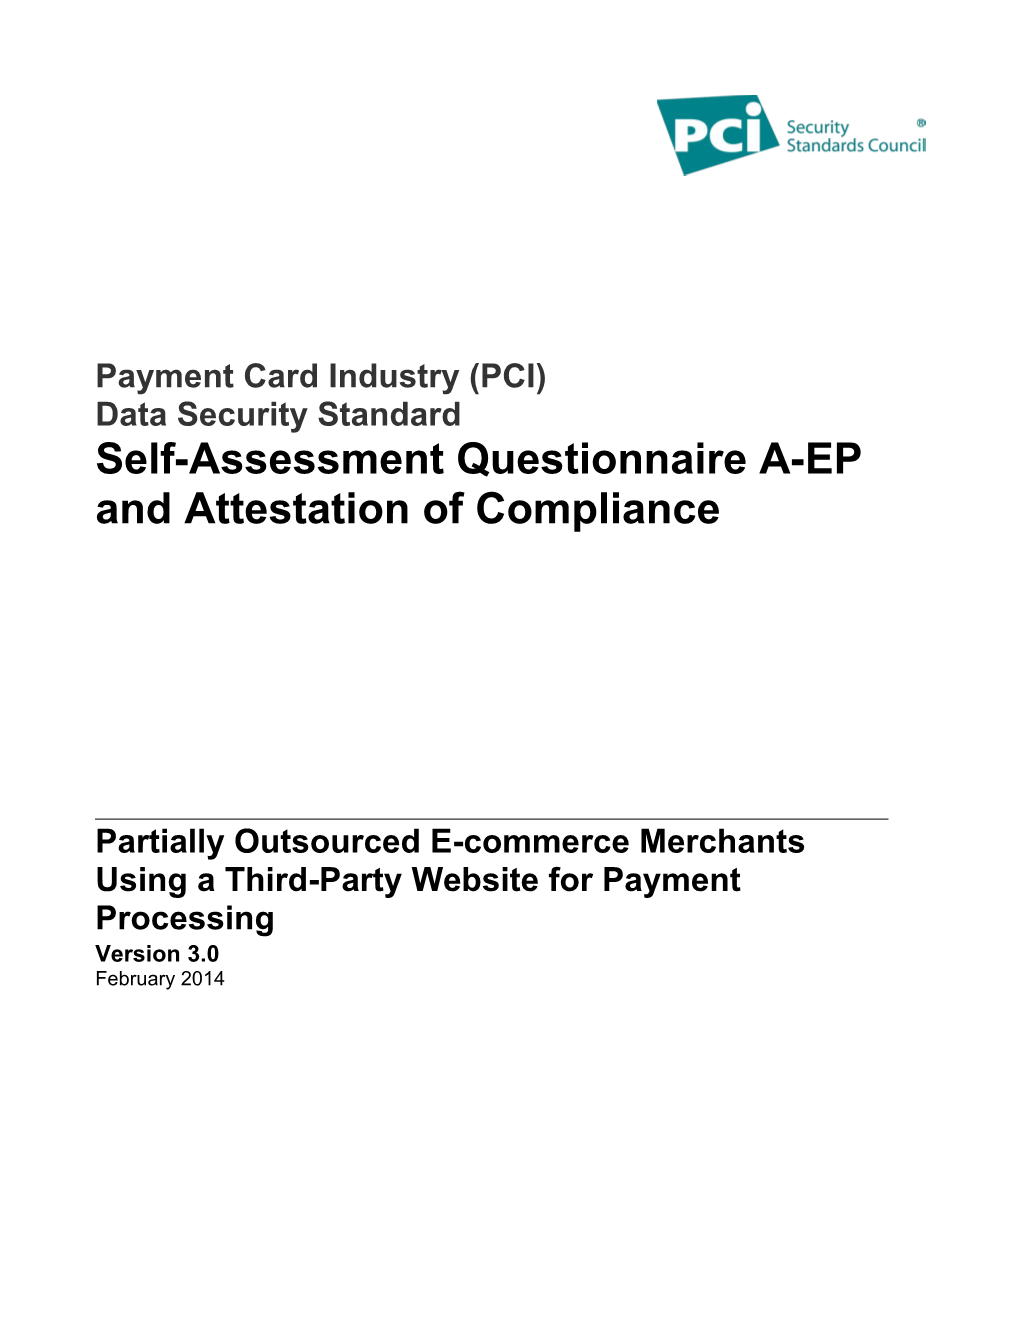 Partially Outsourced E-Commerce Merchants Using a Third-Party Website for Payment Processing